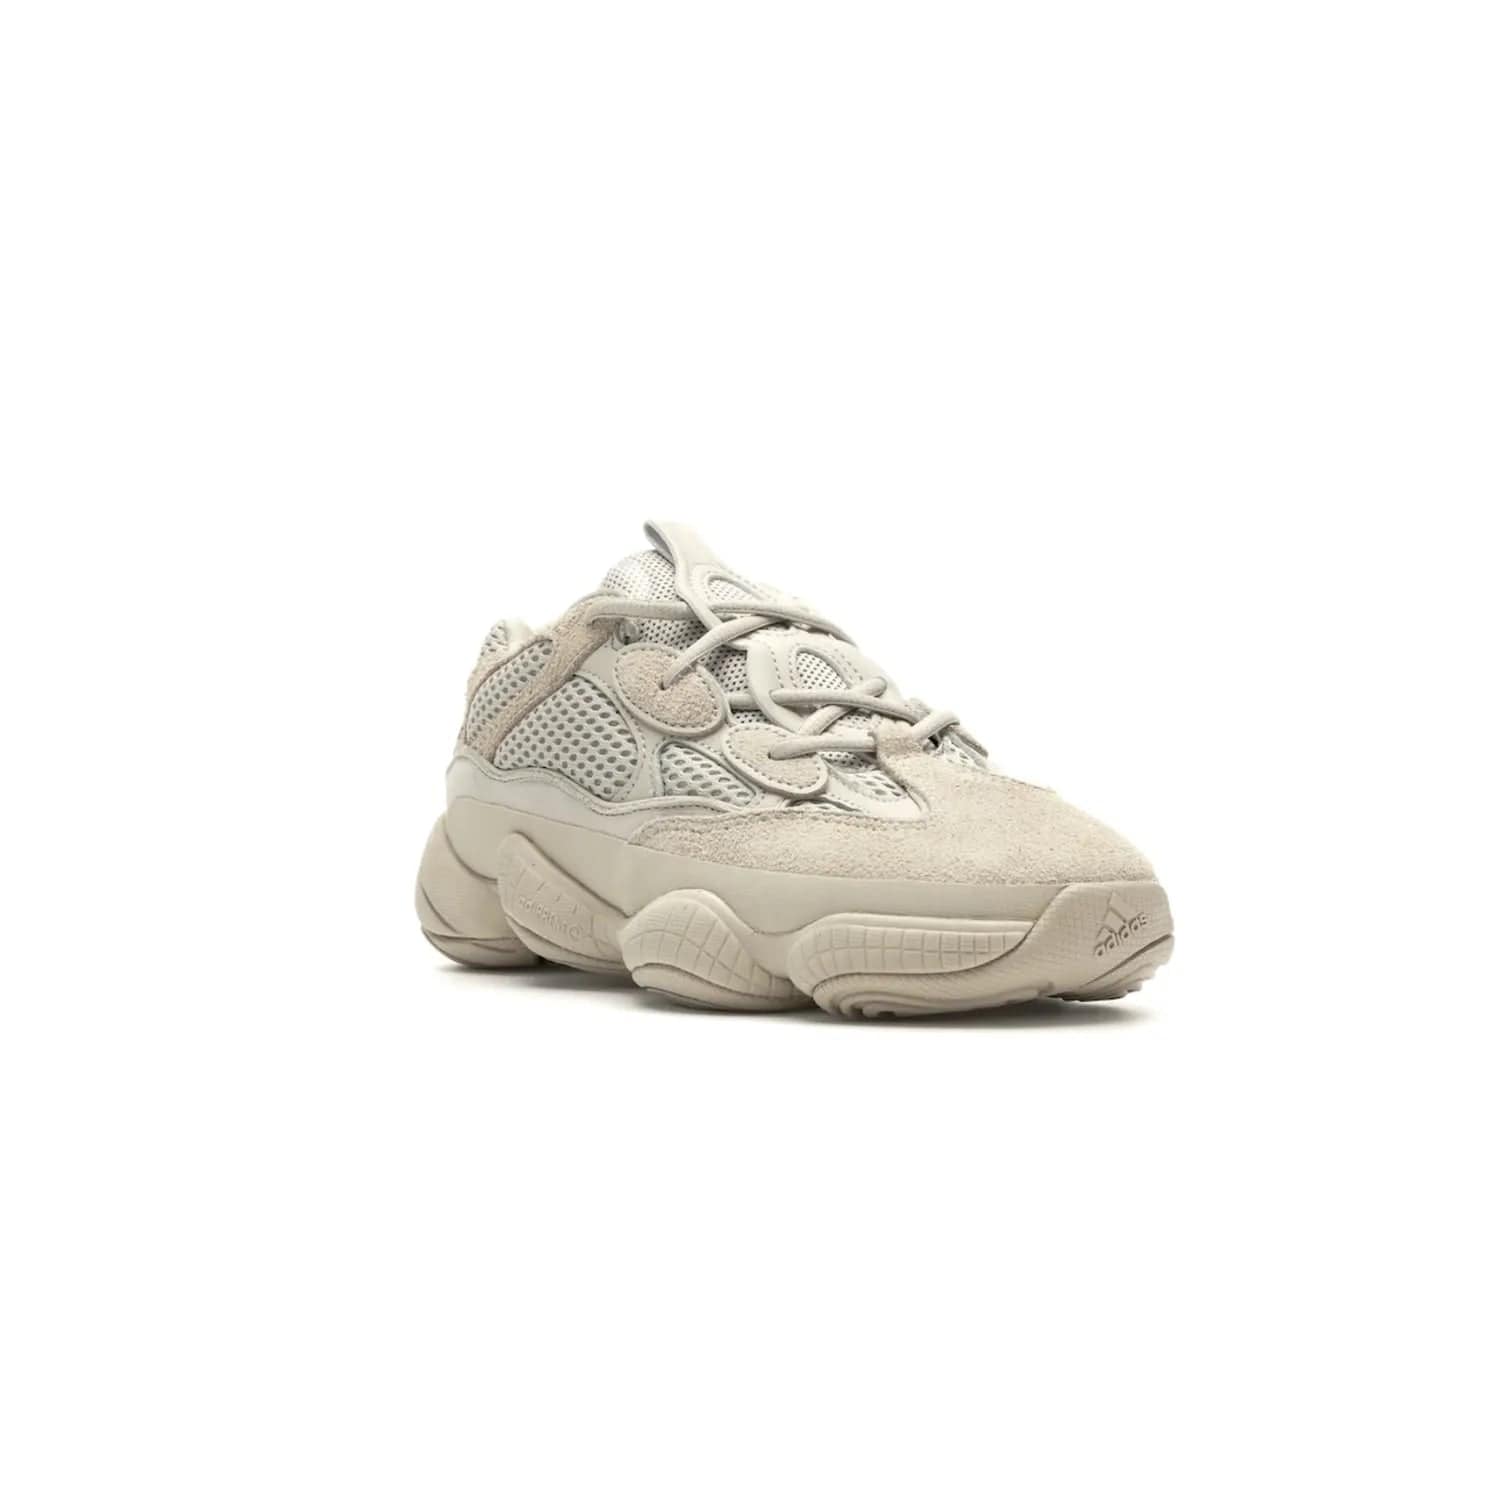 adidas Yeezy 500 Blush - Image 6 - Only at www.BallersClubKickz.com - Step up your sneaker game with the Adidas Yeezy 500 Blush. Monochromatic pale pink palette, hiking-inspired suede/mesh construction, plus adiPRENE sole for comfort and performance. Get the Adidas Yeezy 500 and experience true style and comfort.